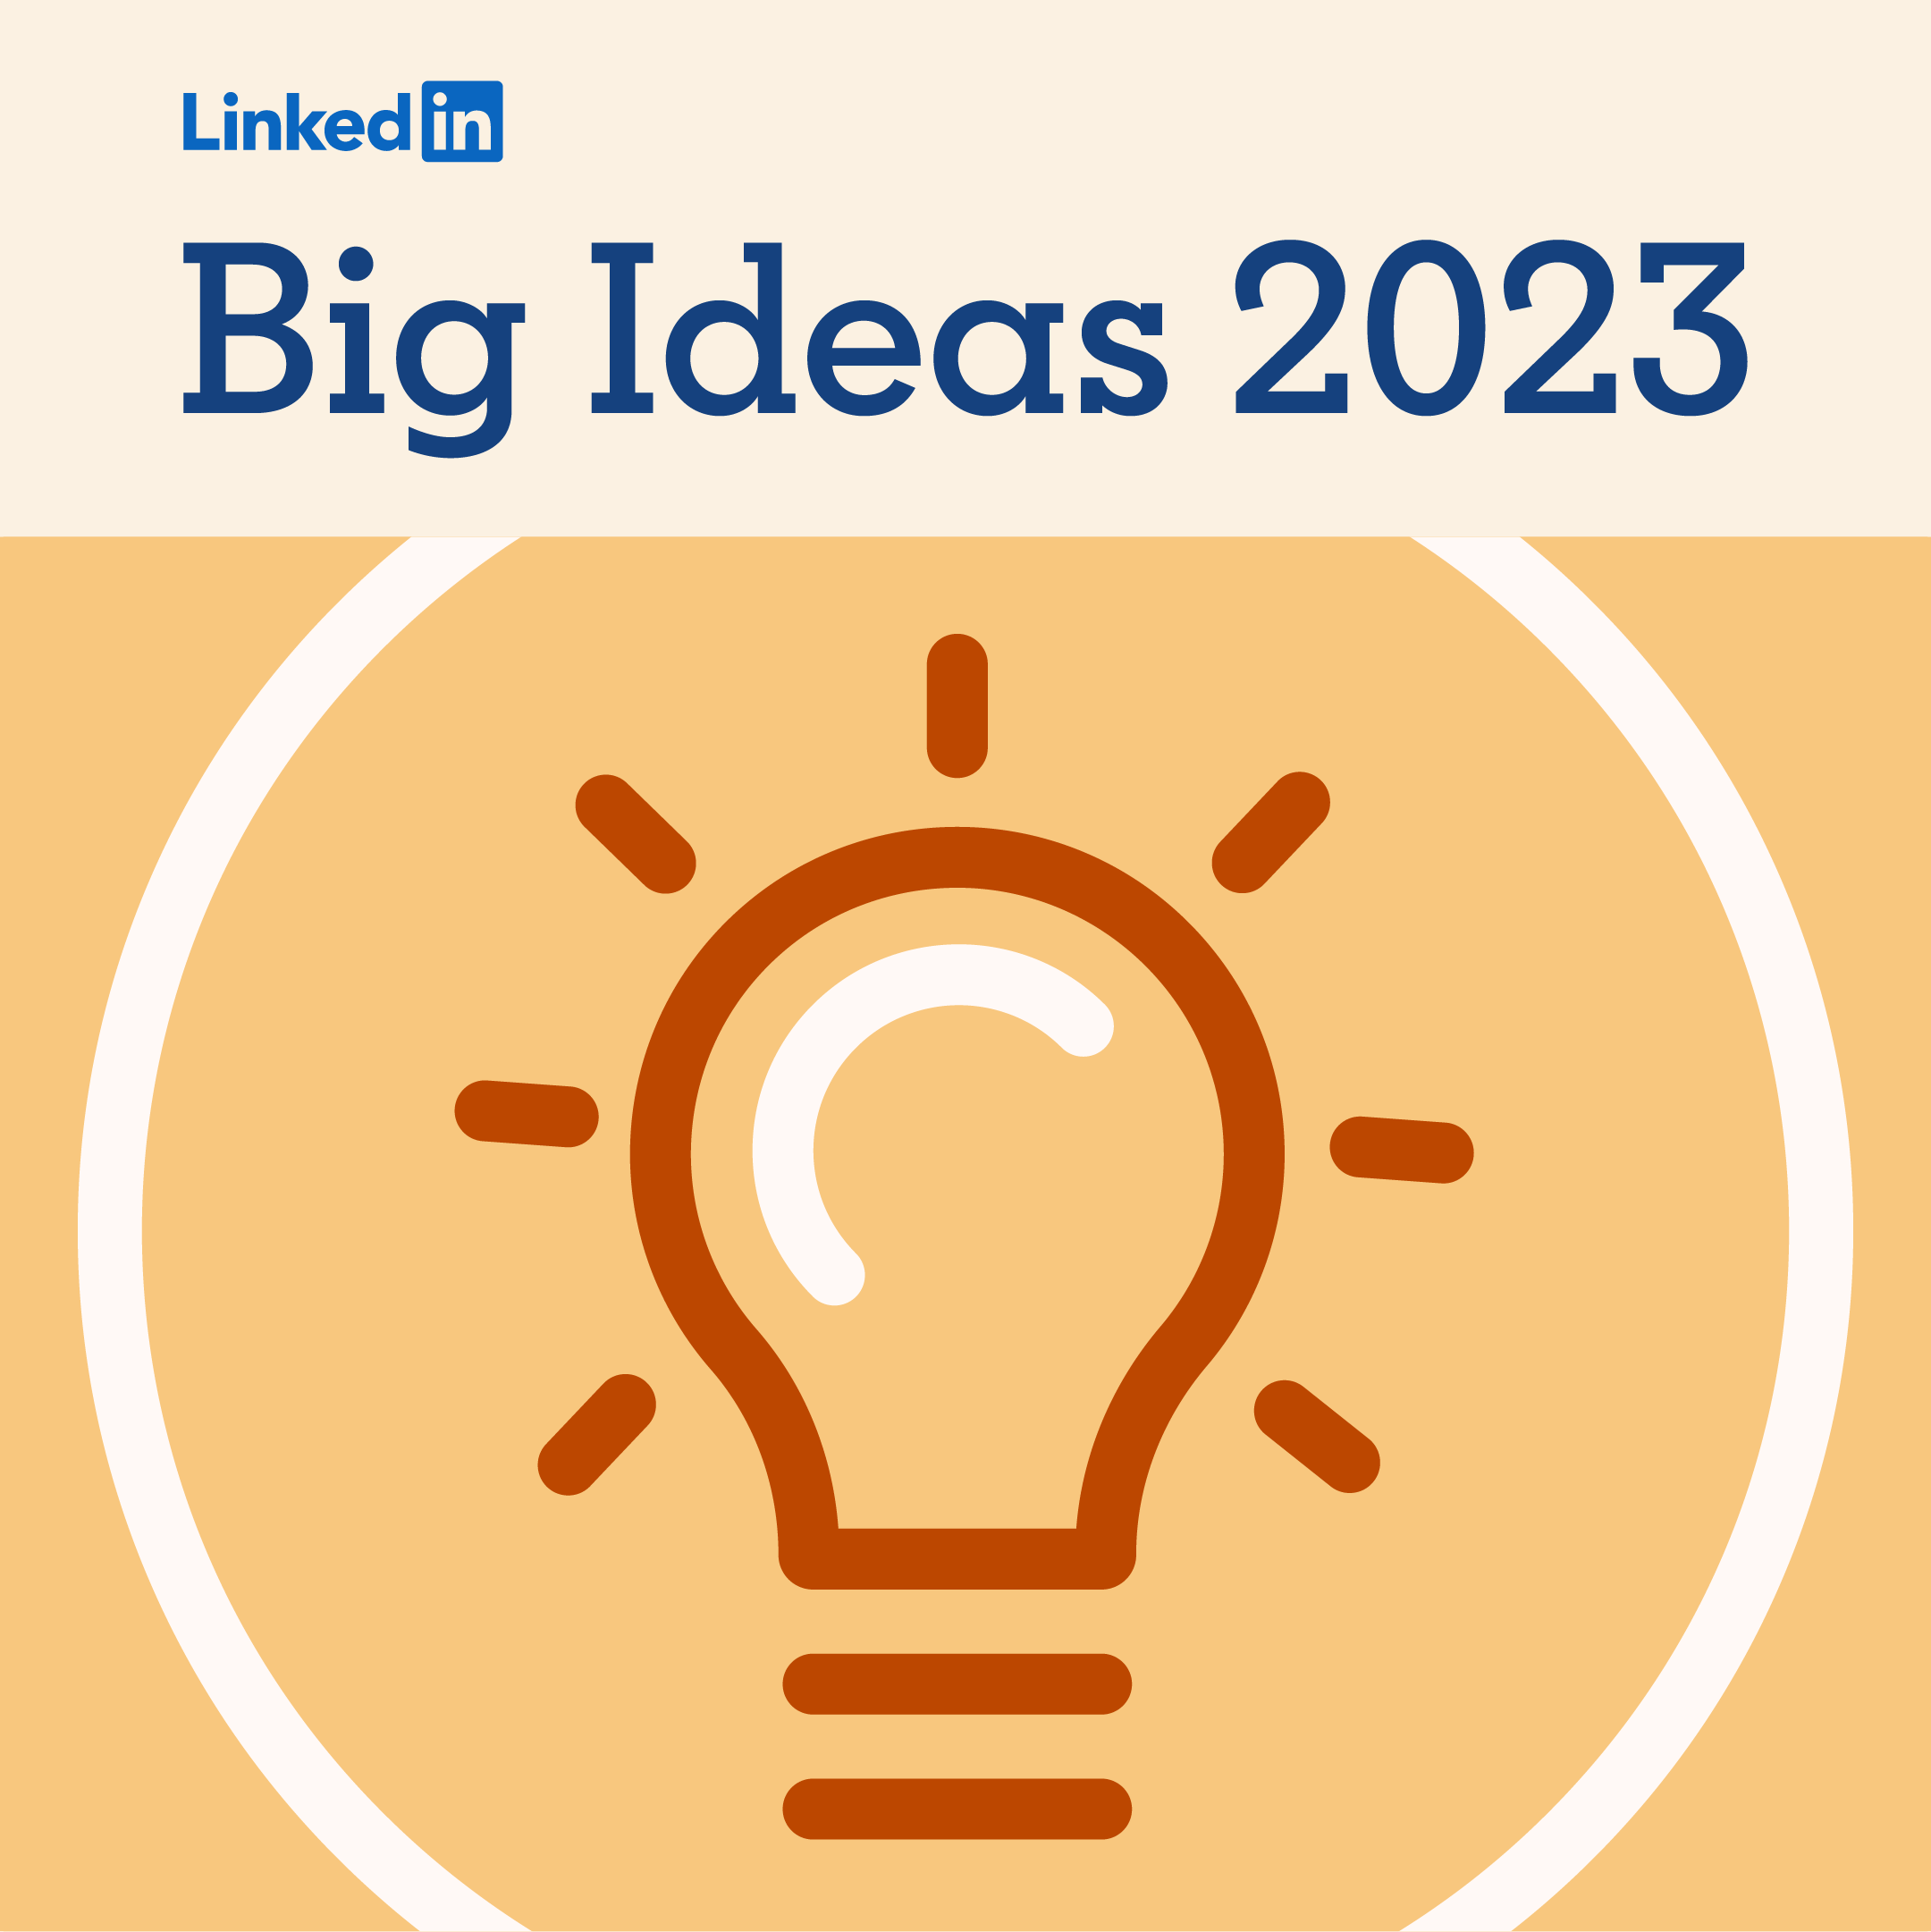 Our Big Ideas for 2023